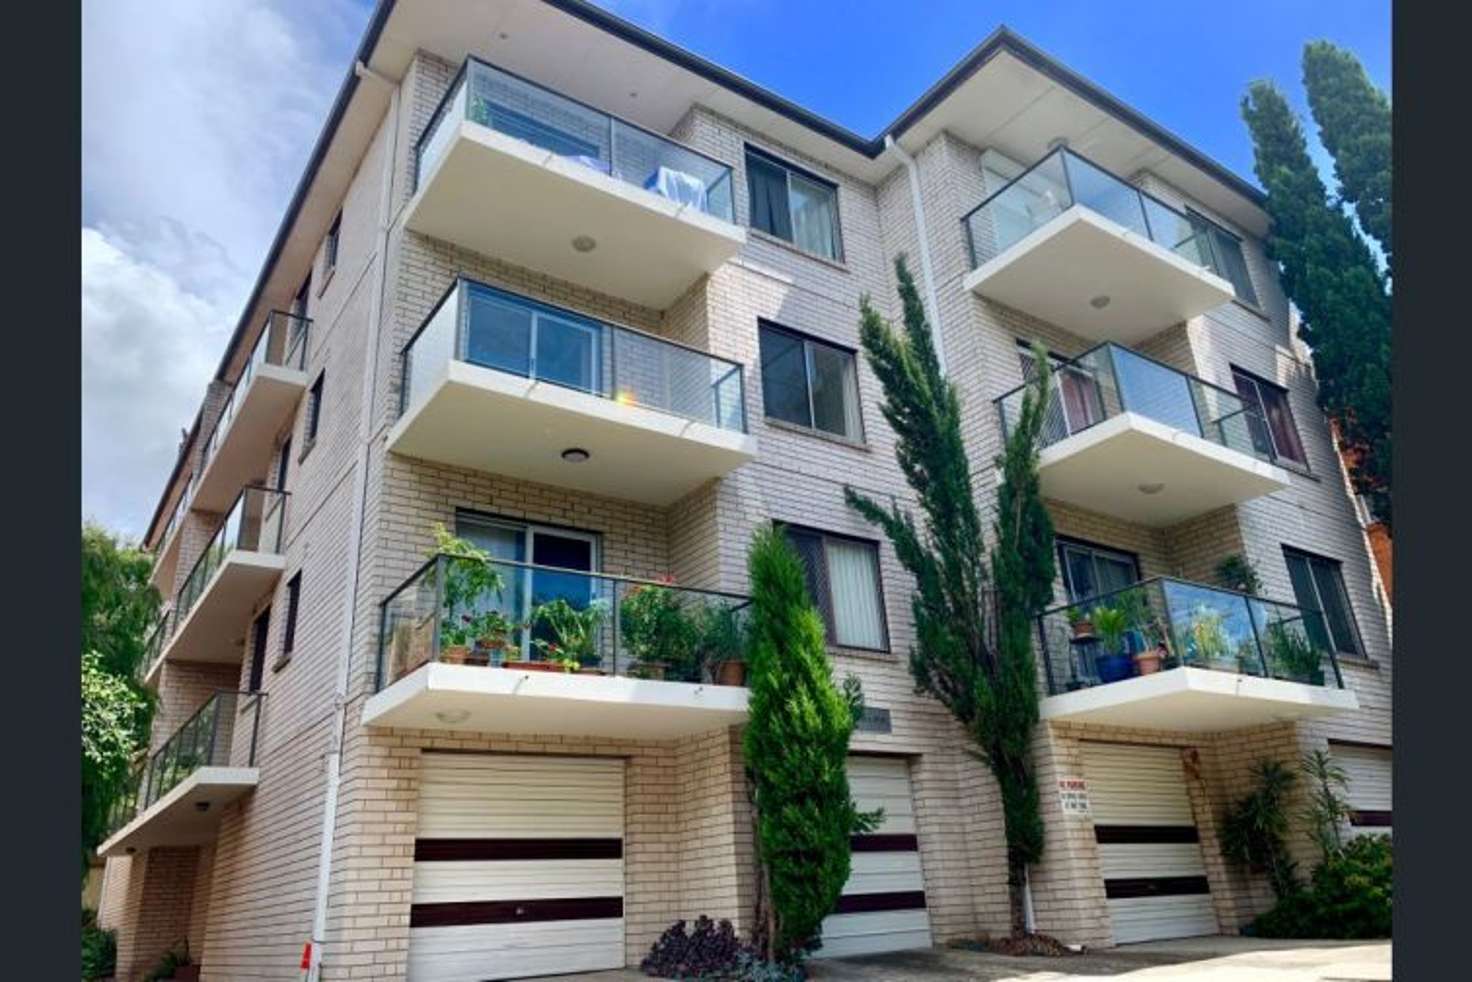 Main view of Homely apartment listing, 8/11-12 Alexandra Pde, Rockdale NSW 2216